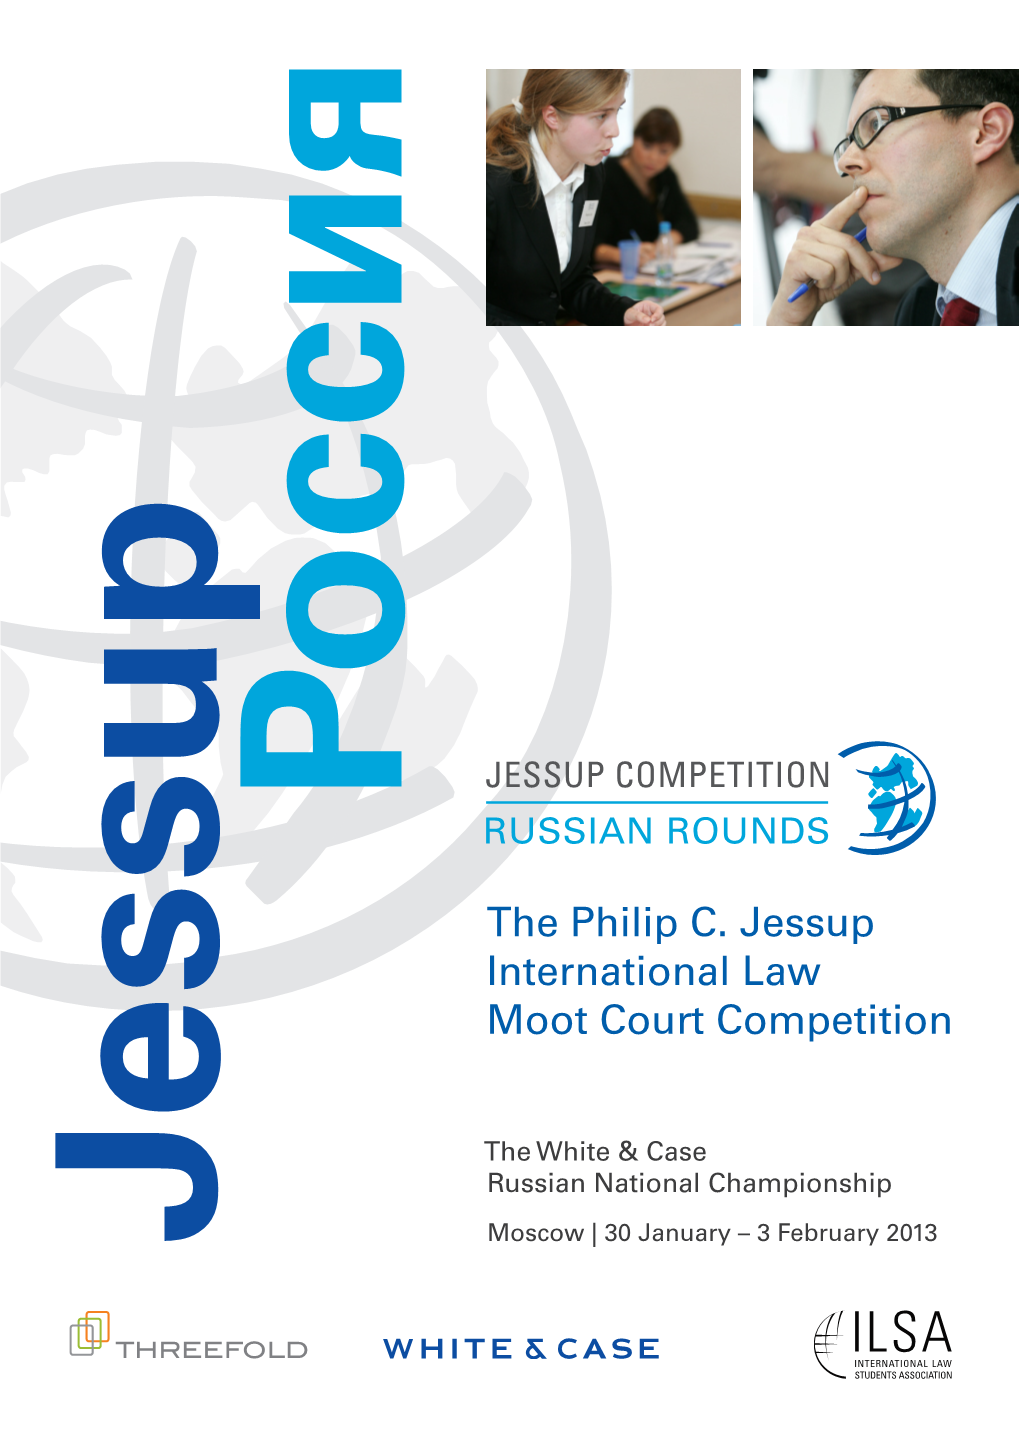 The Philip C. Jessup International Law Moot Court Competition